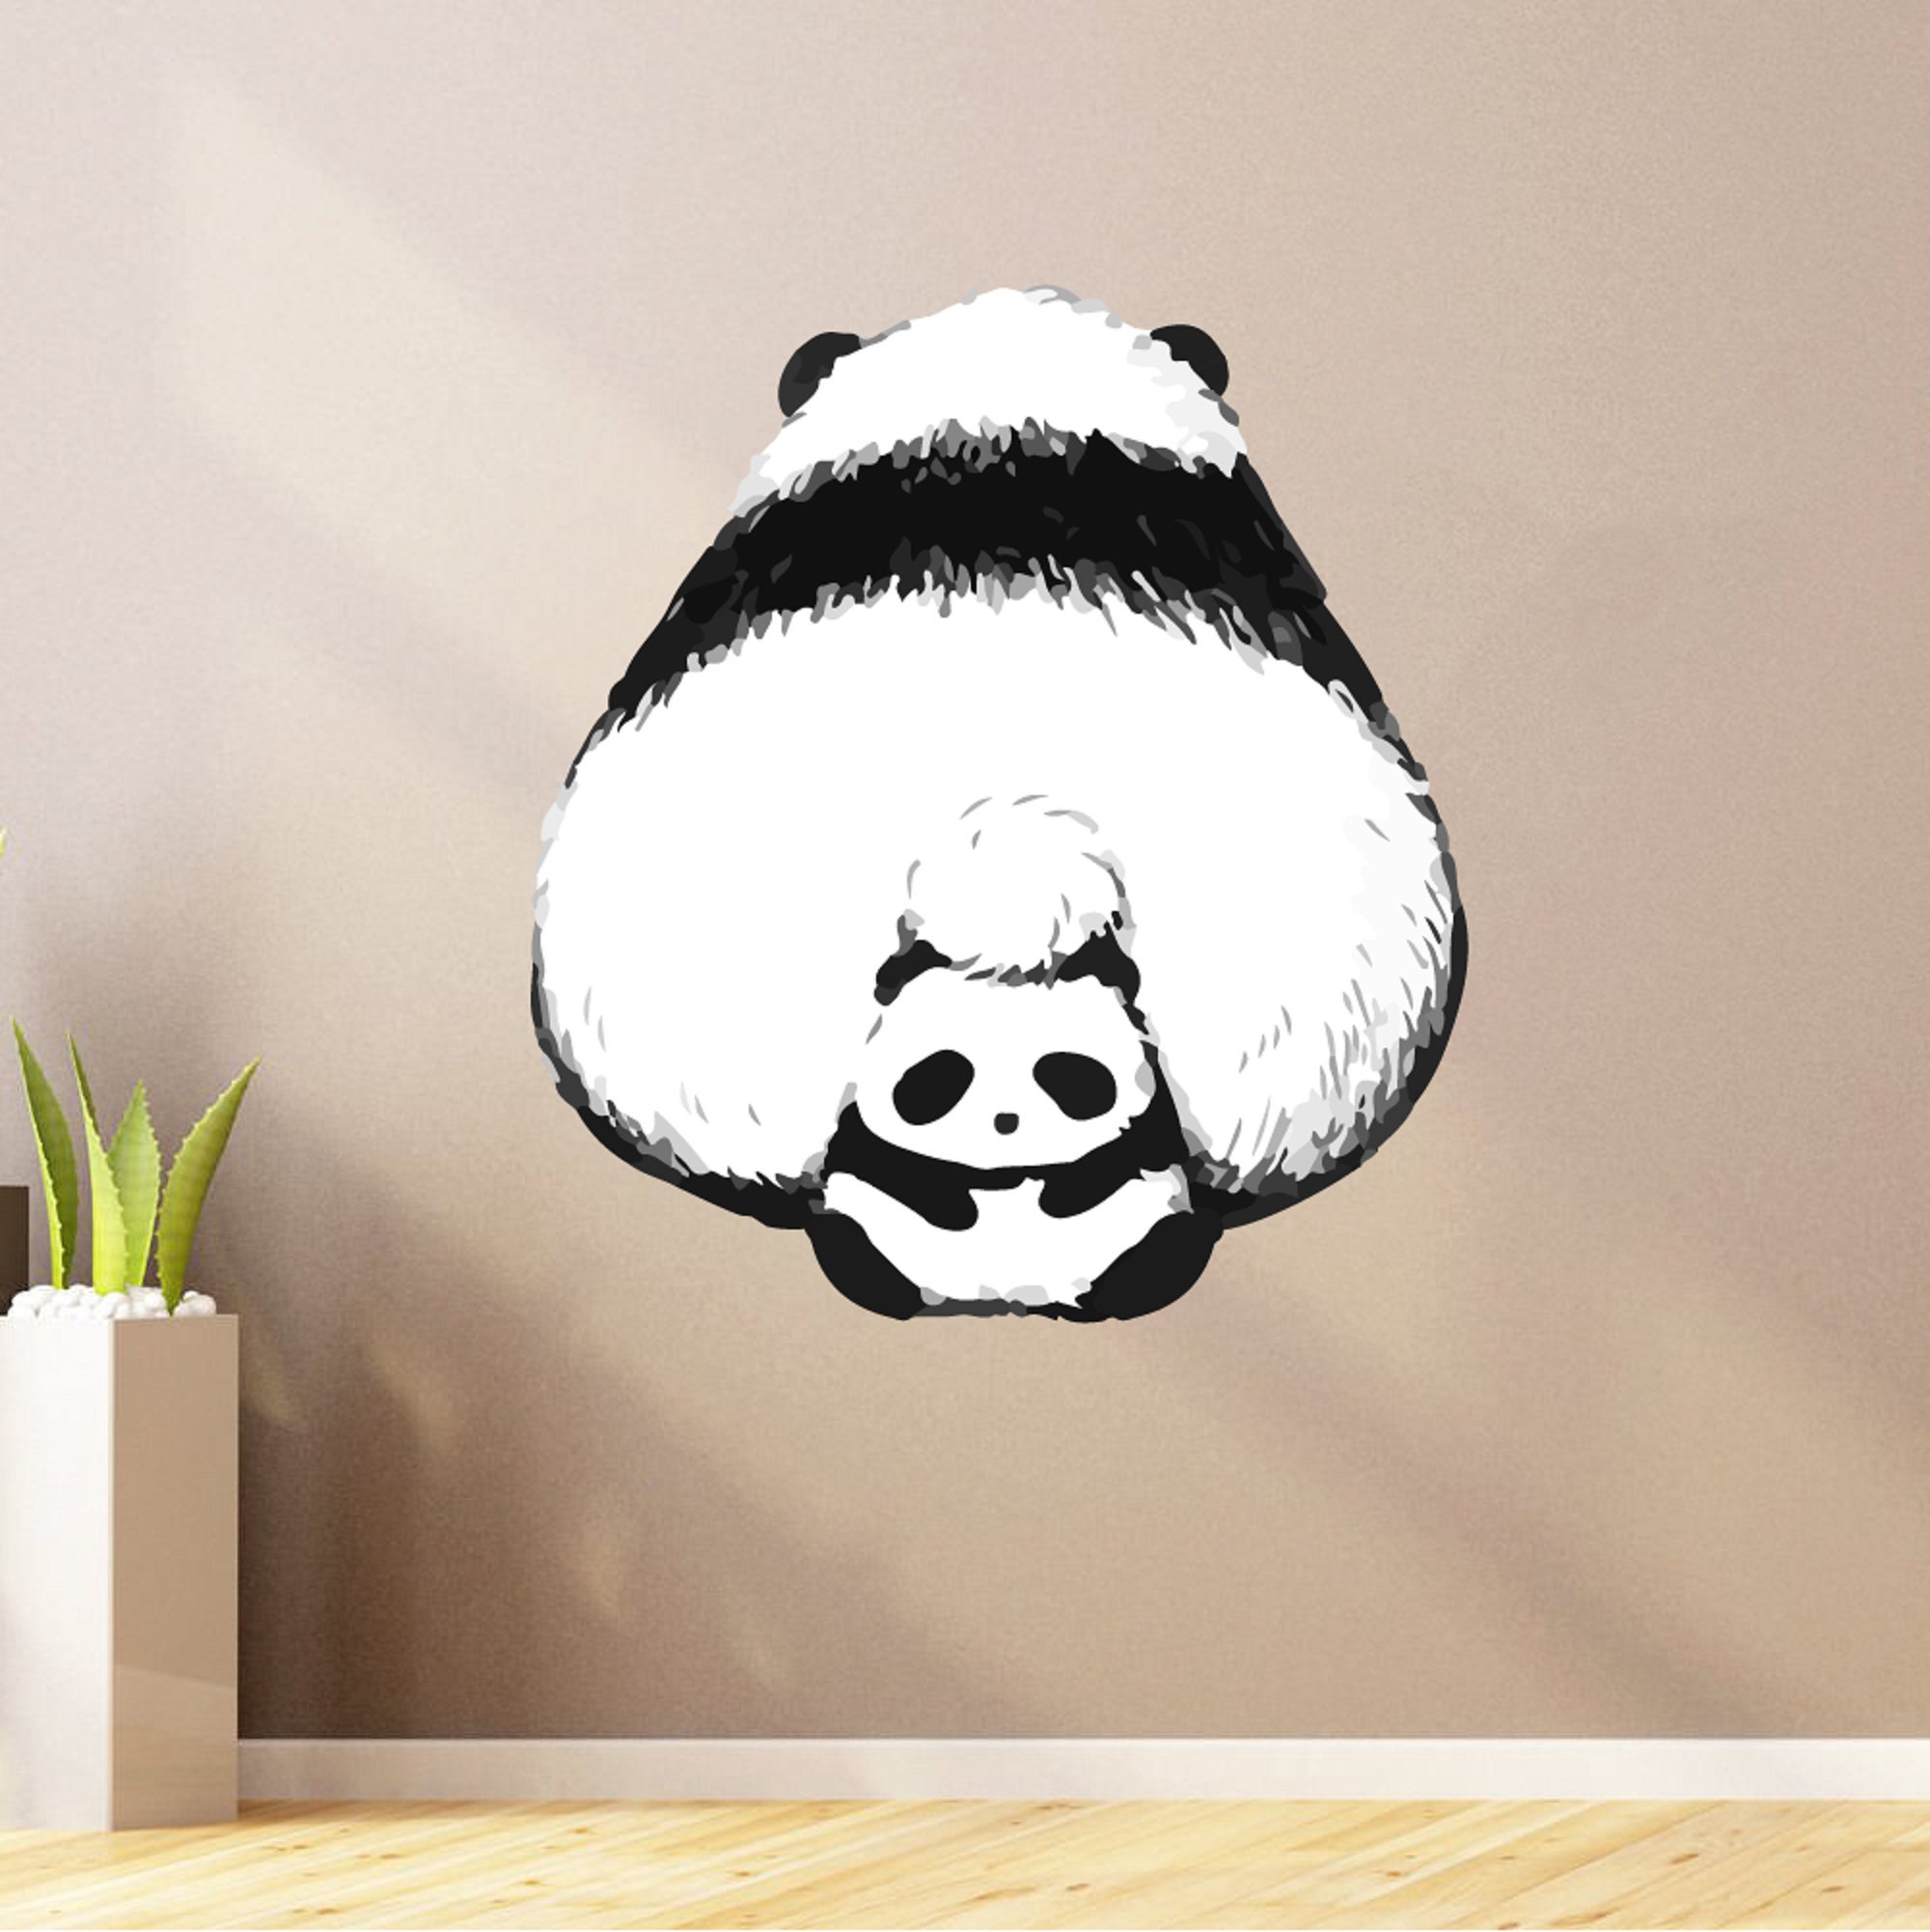 Realistic Art Design of a Panda and Her Baby Sitting Cozy on Her